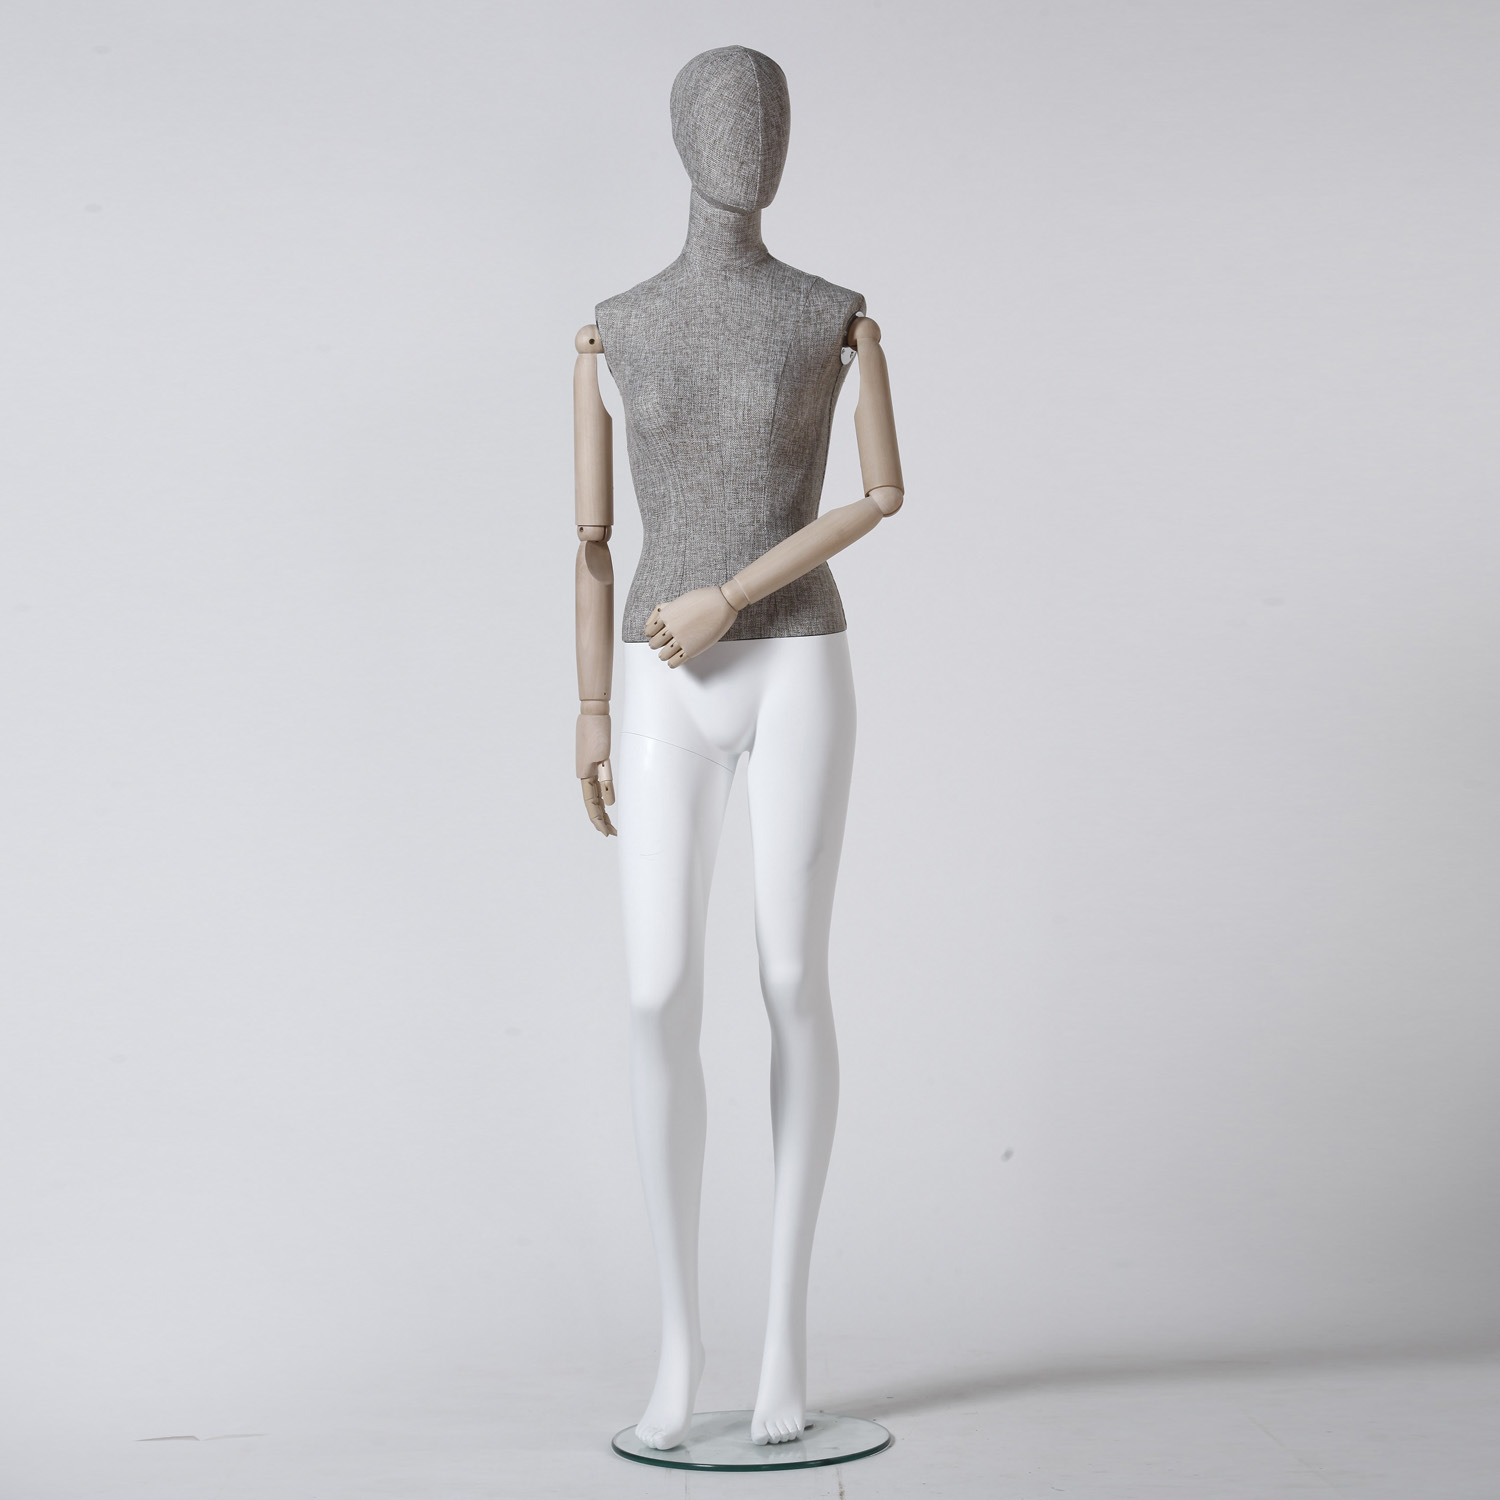 Fabric Wrapped Female Mannequin with Wooden Arm